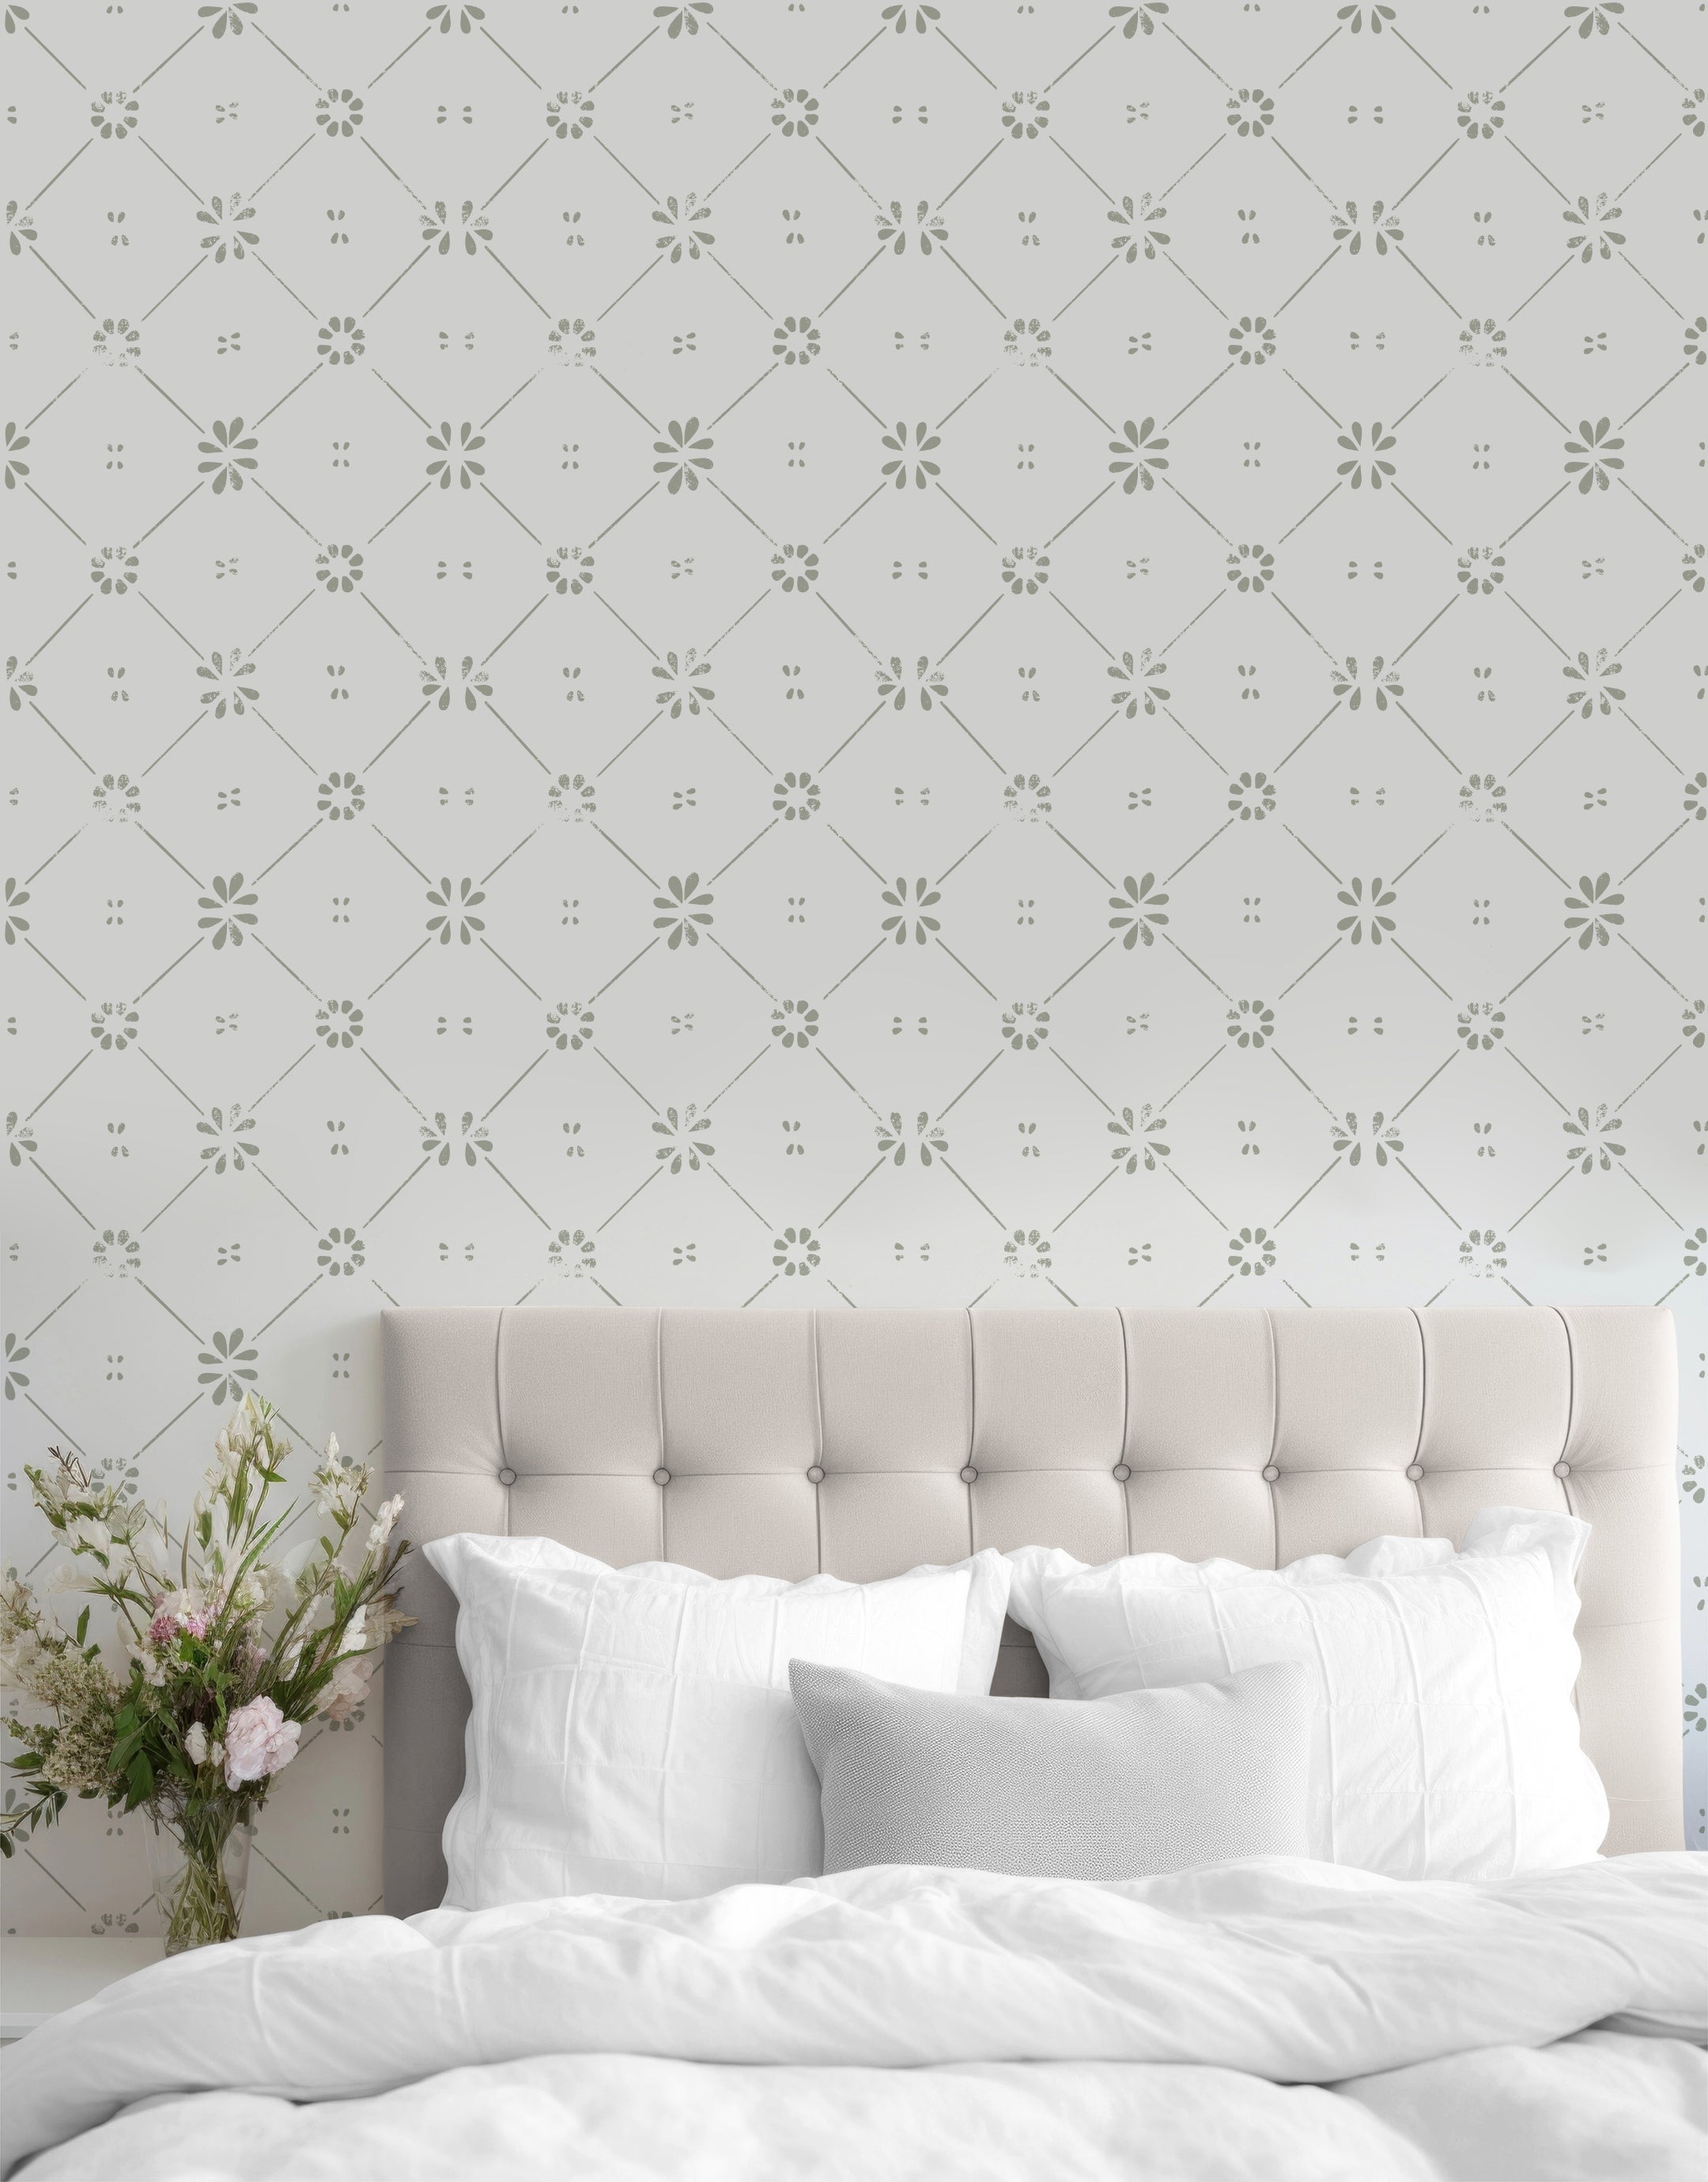 A bedroom with the Floral Lattice Wallpaper adorning the wall behind a beige tufted headboard. The wallpaper features a repeating pattern of green flowers and lines on a white background, adding a touch of sophistication to the room. A vase with fresh flowers is placed on a bedside table.